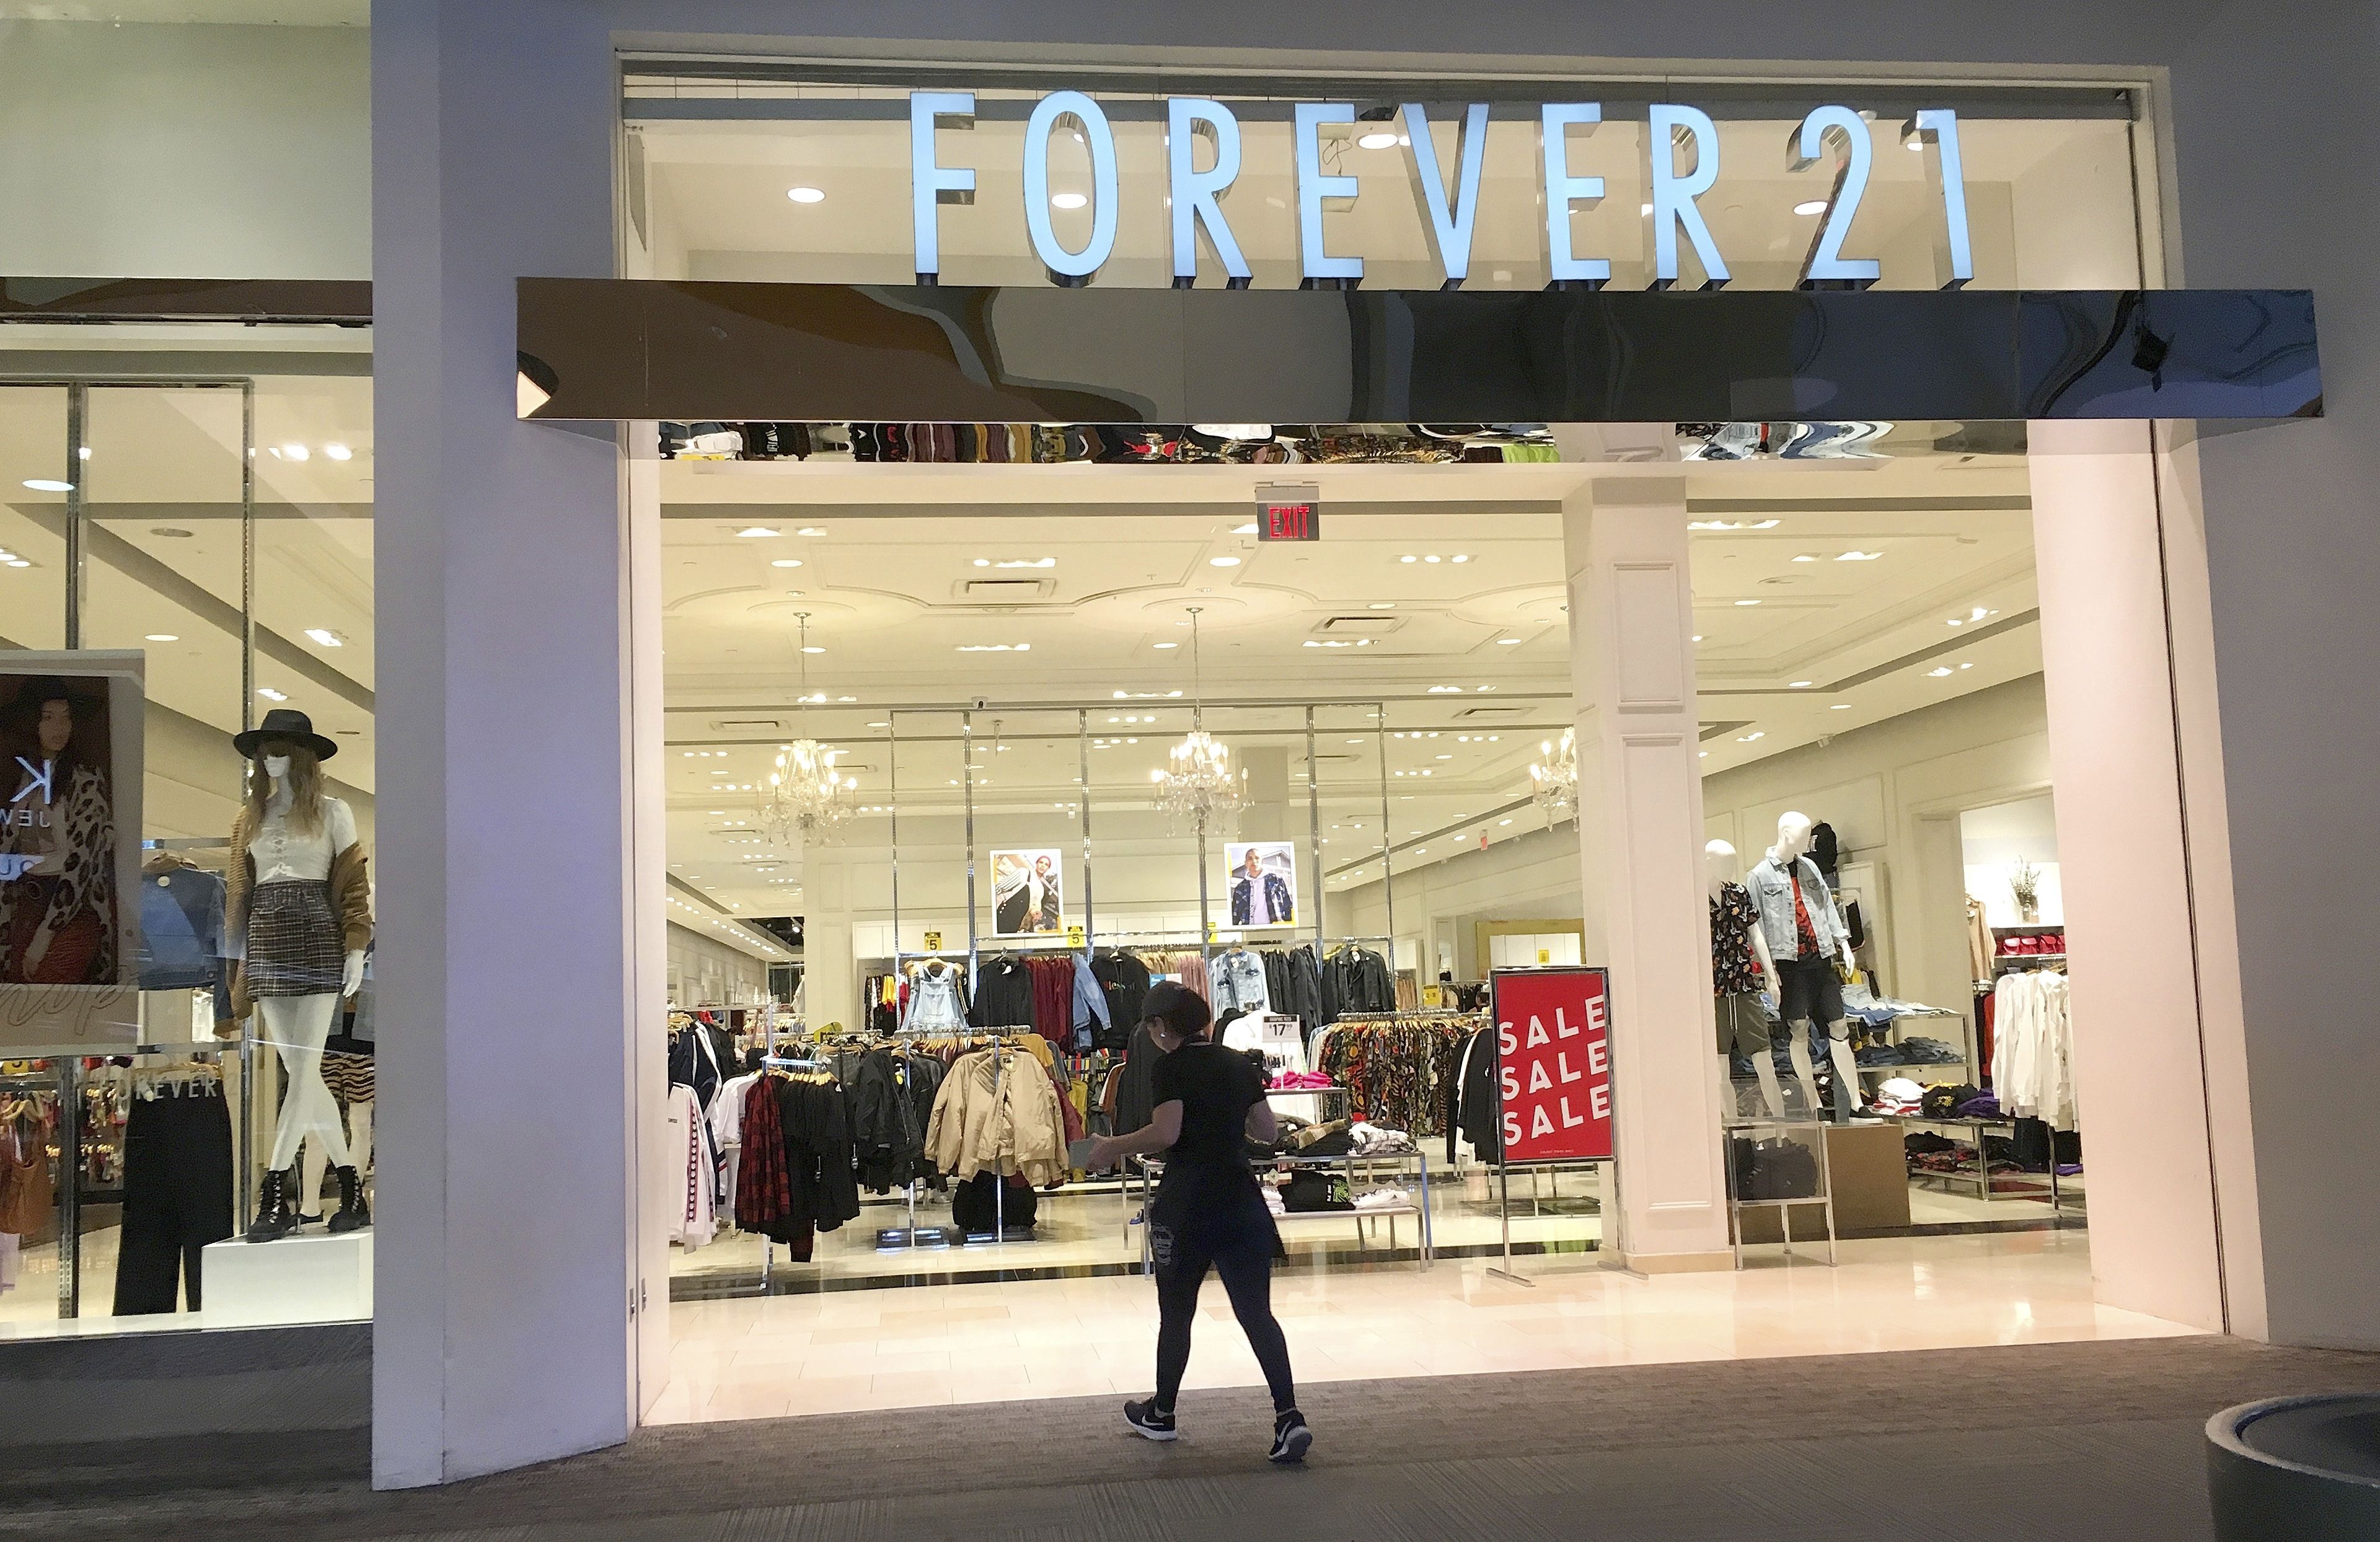 FOREVER 21 - CLOSED - 11 Reviews - 10315 Silverdale Way NW